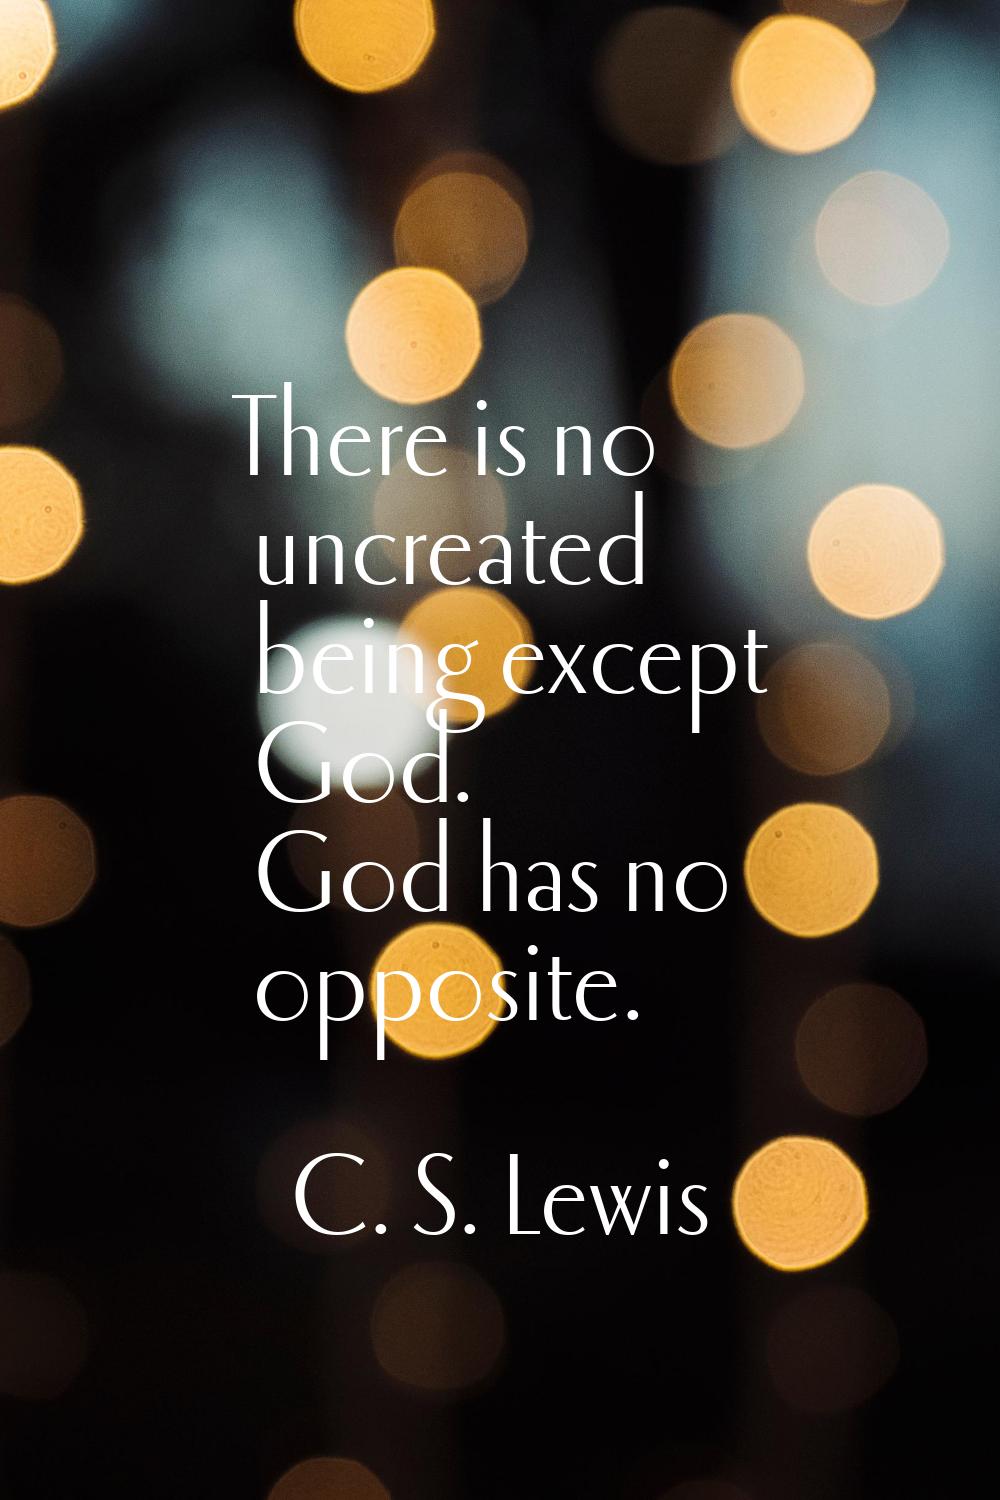 There is no uncreated being except God. God has no opposite.